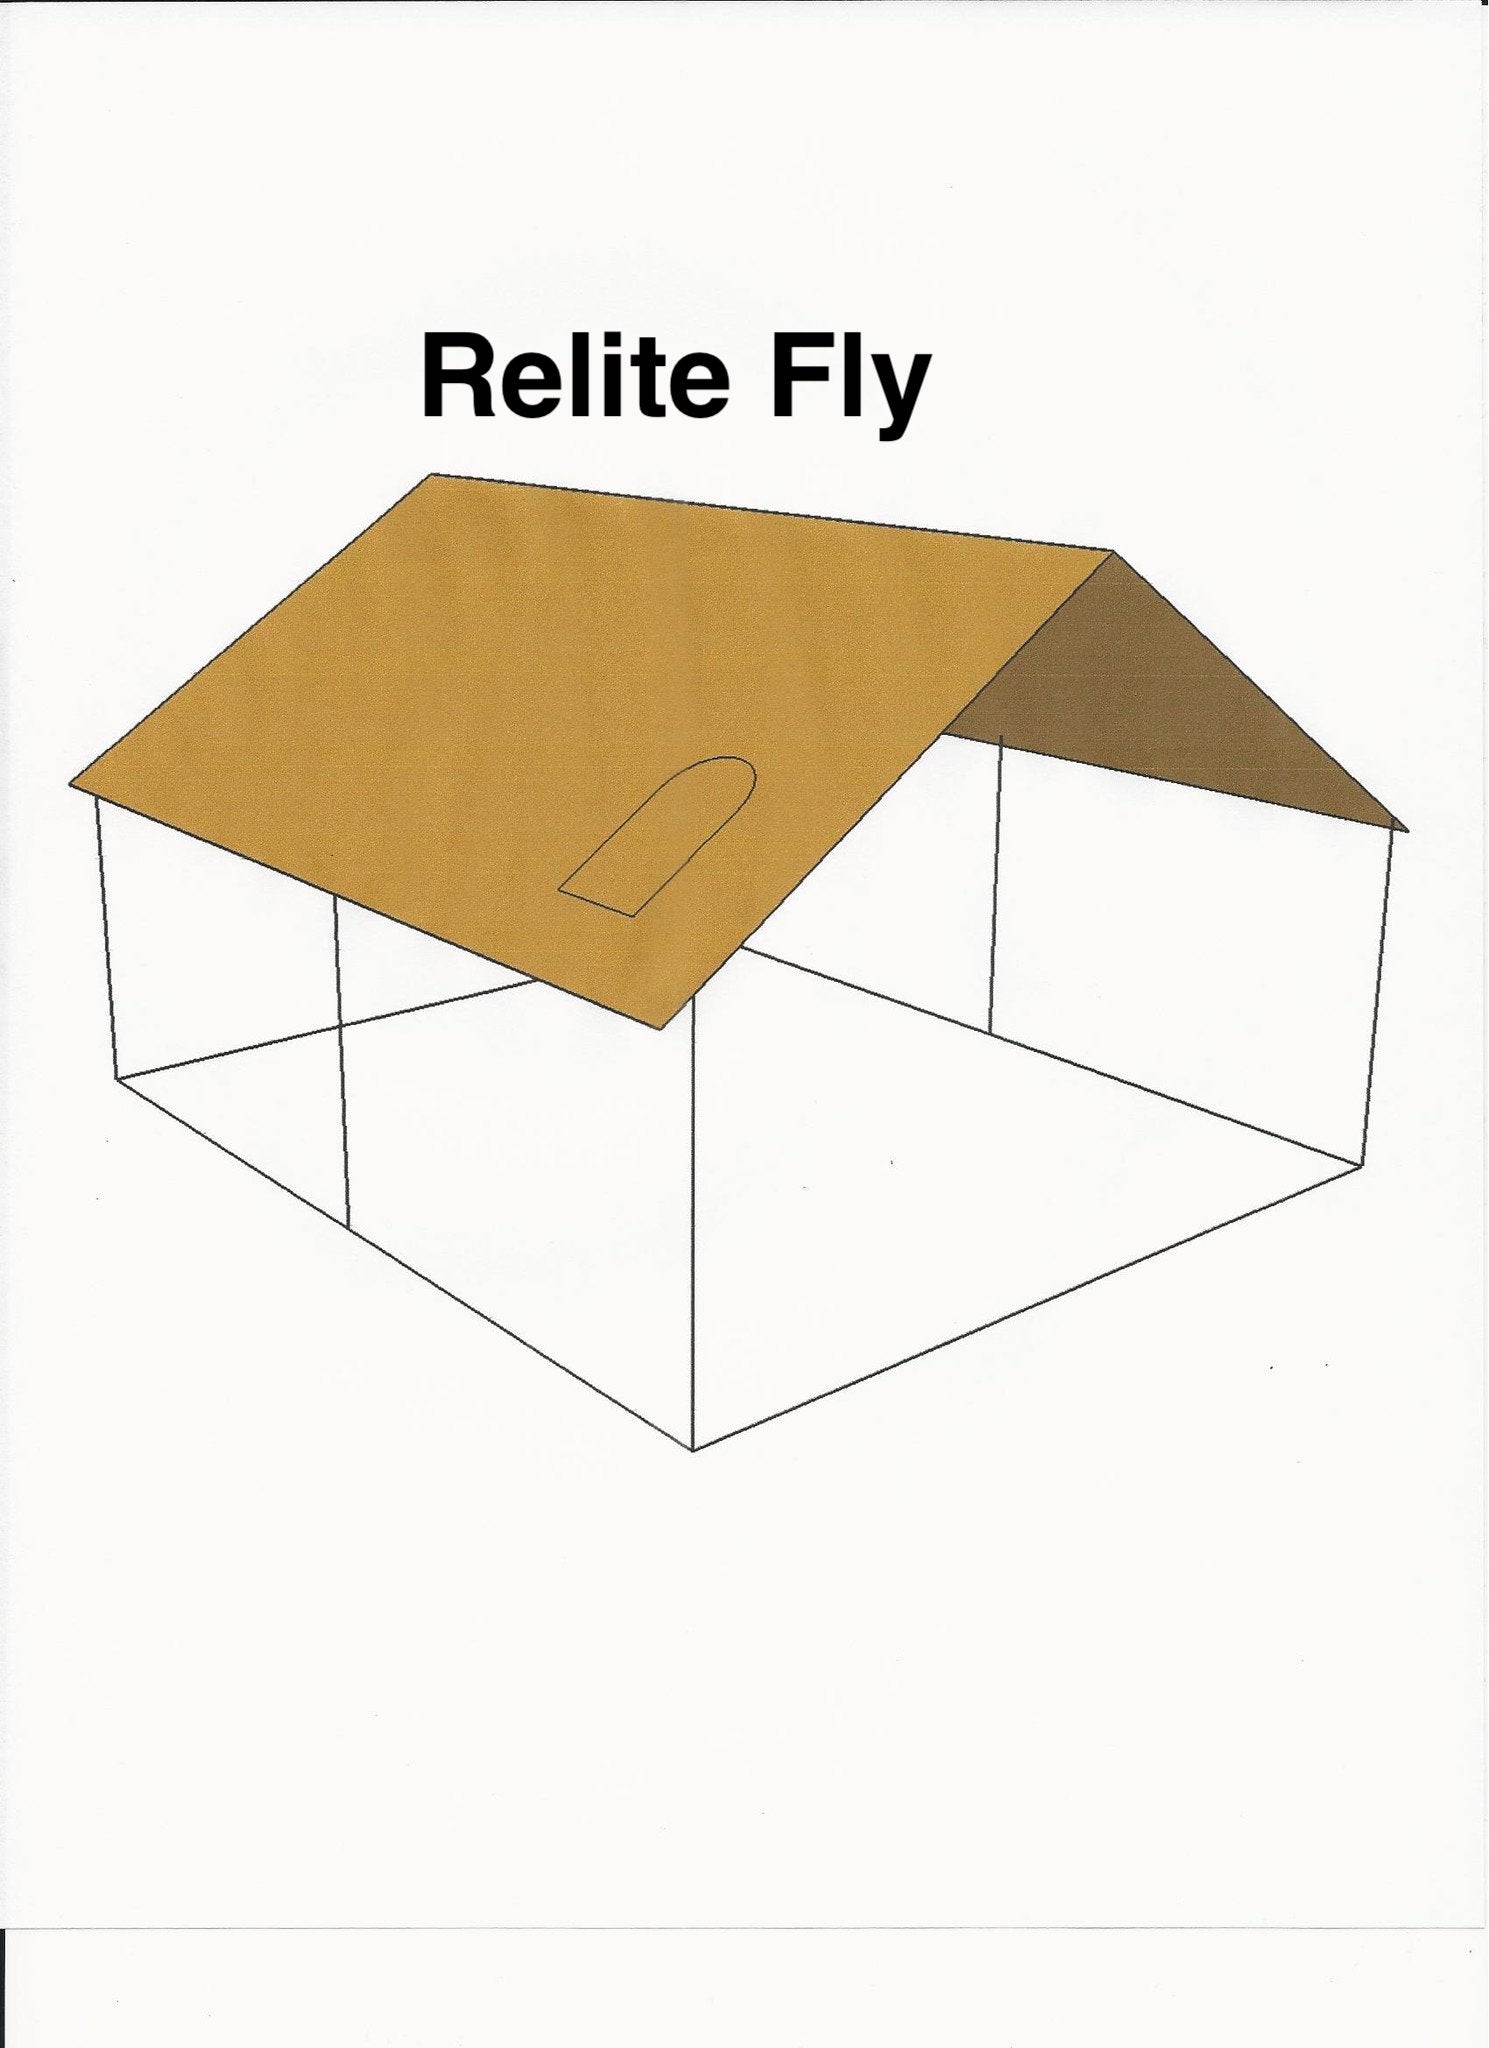 Diagram showing Montana Relite Fly